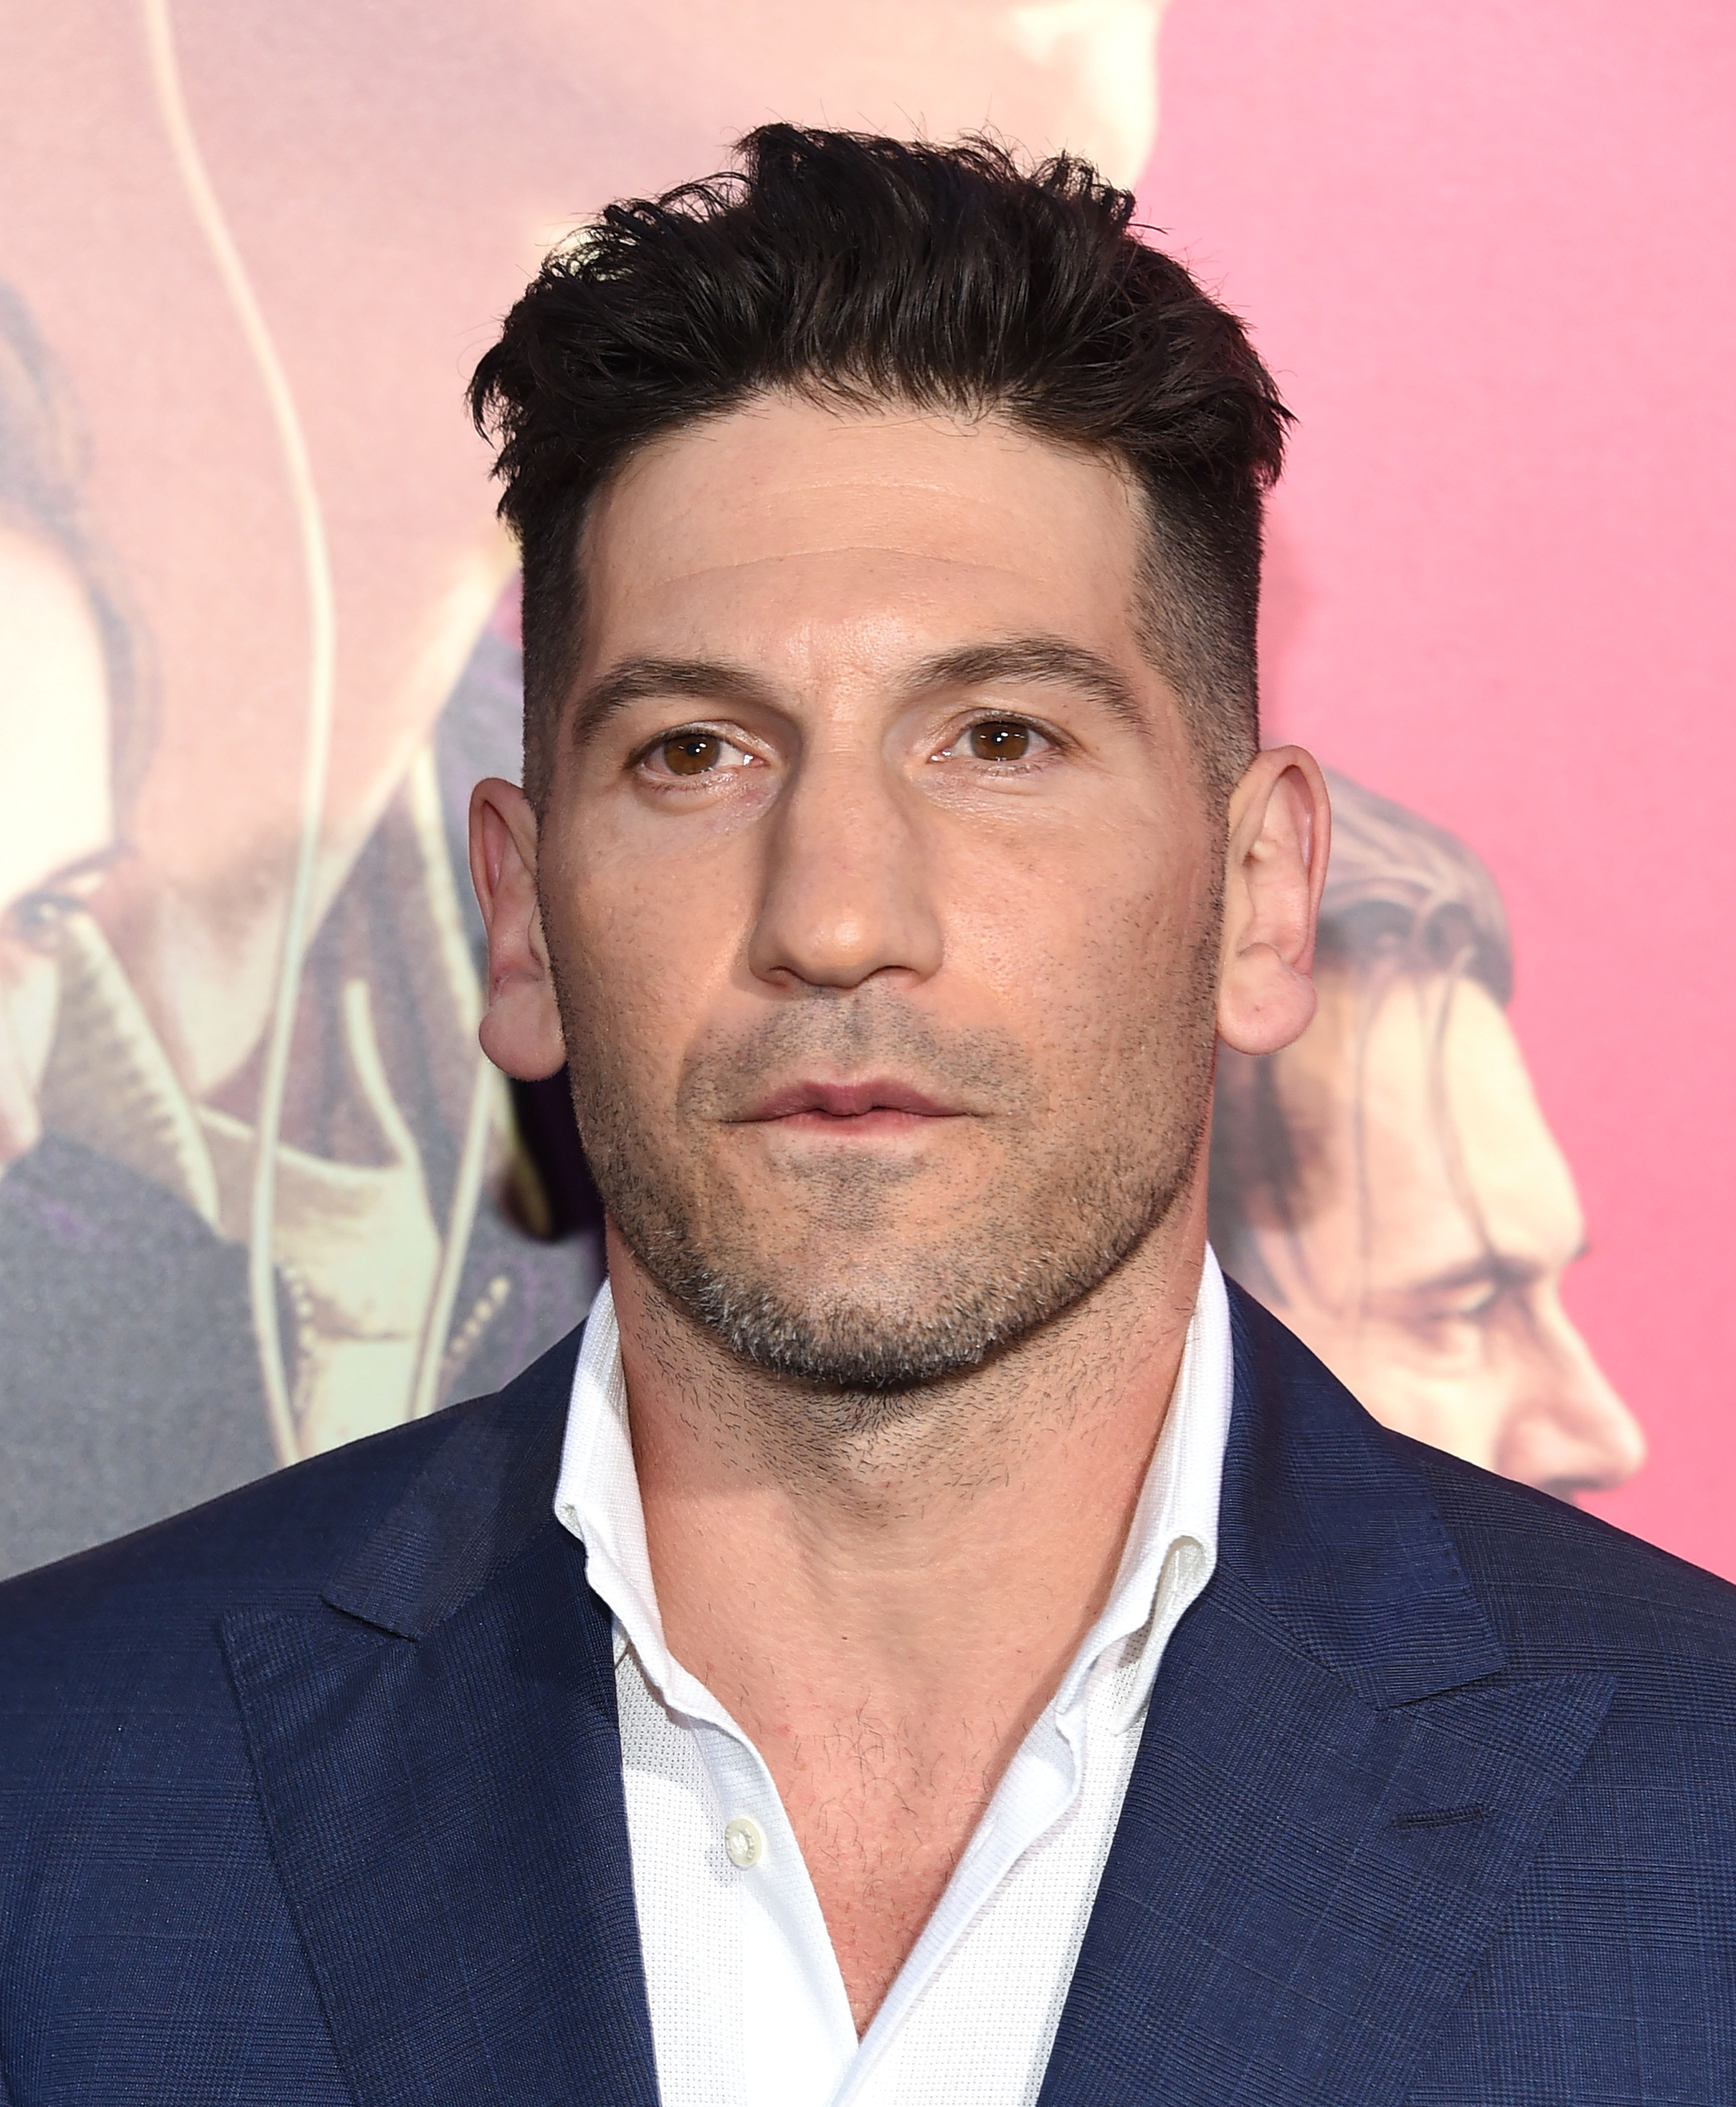 LOS ANGELES - JUN 14:  Jon Bernthal arrives for the "Baby Driver